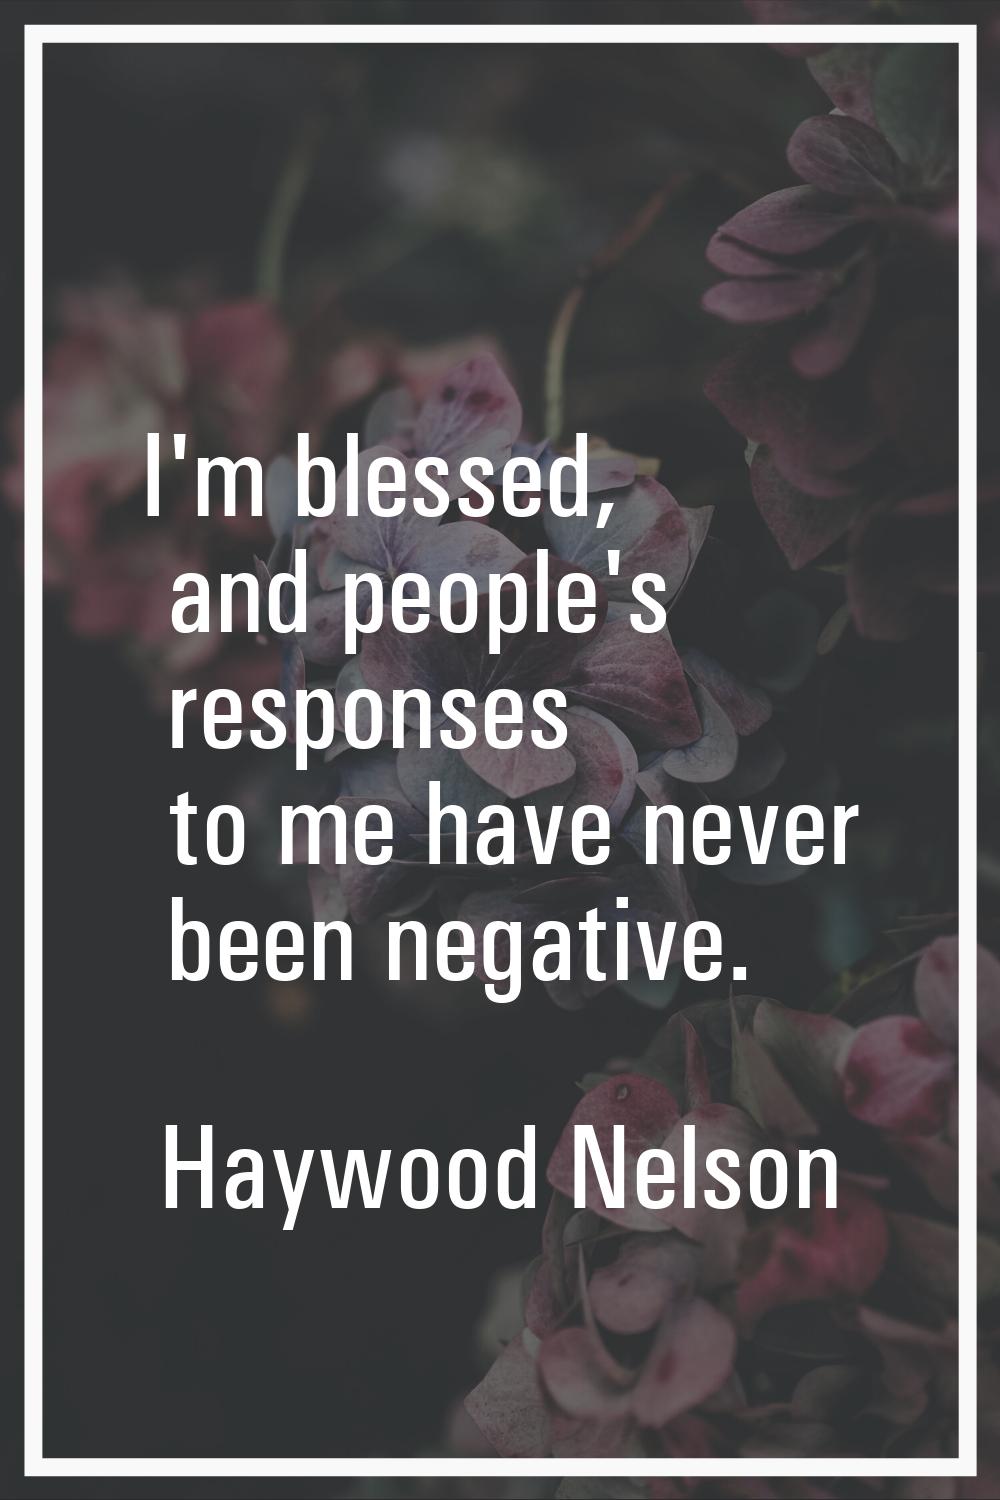 I'm blessed, and people's responses to me have never been negative.